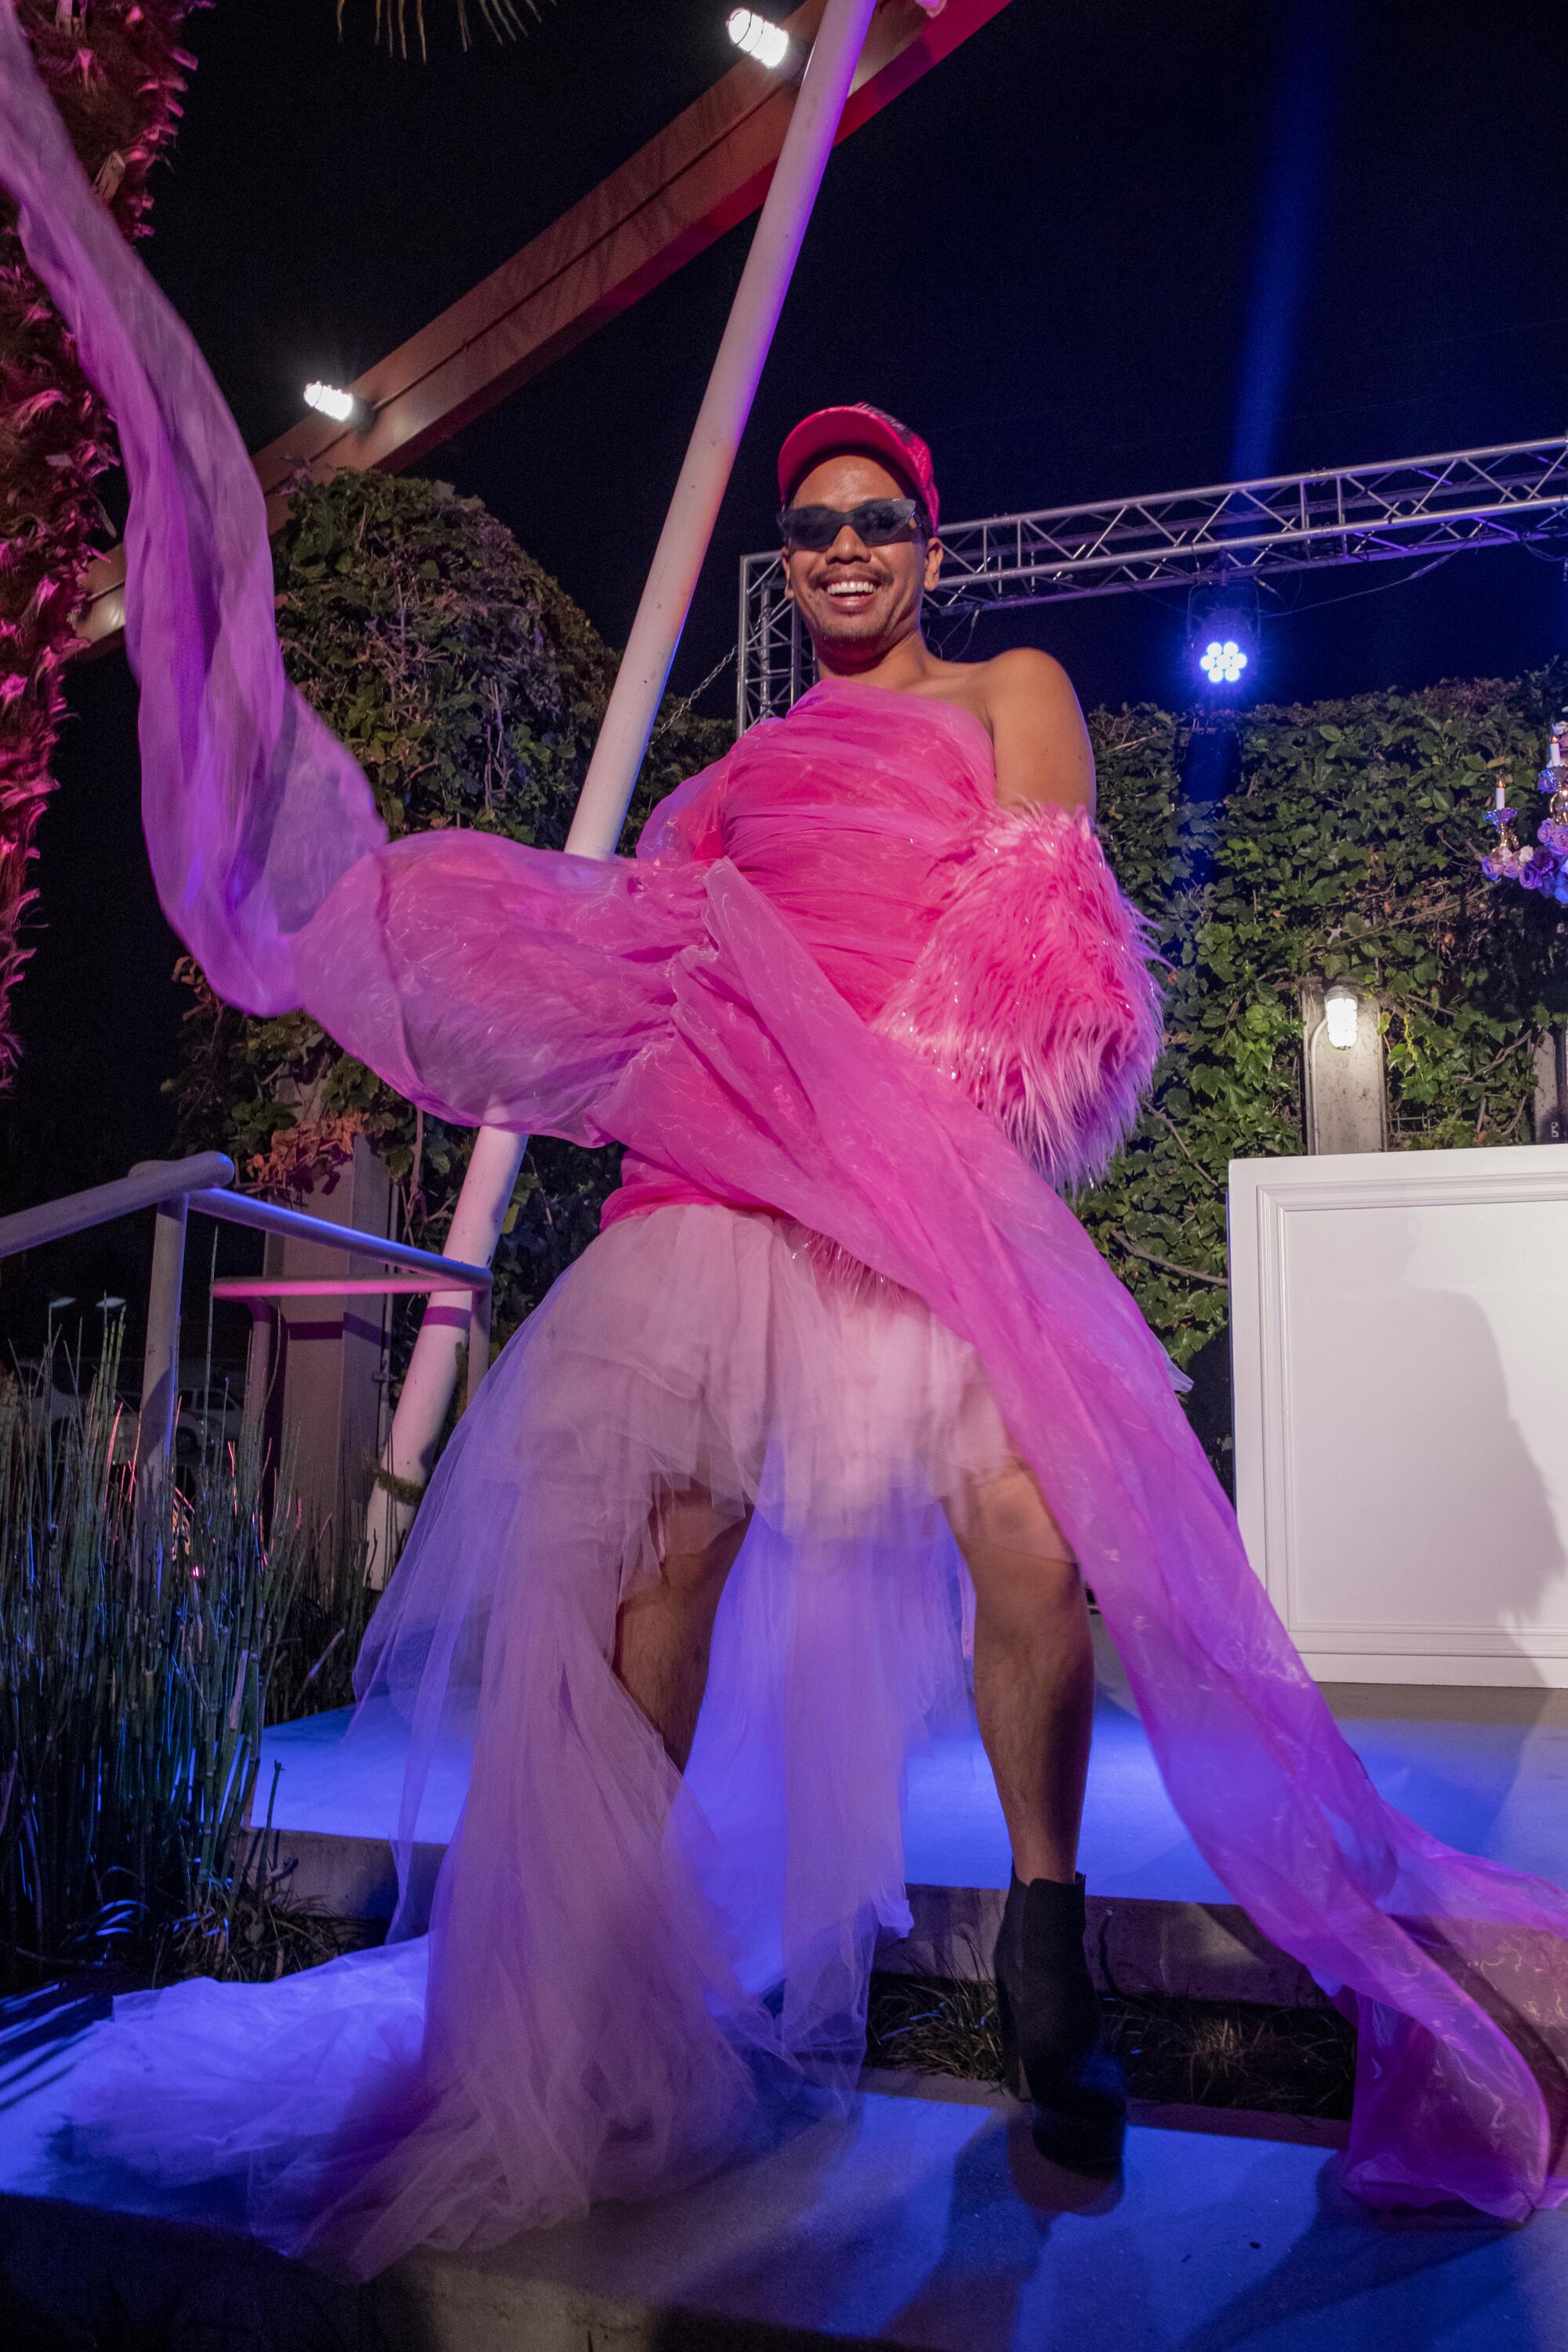 Sir Christopher Saint poses in a pink tule dress